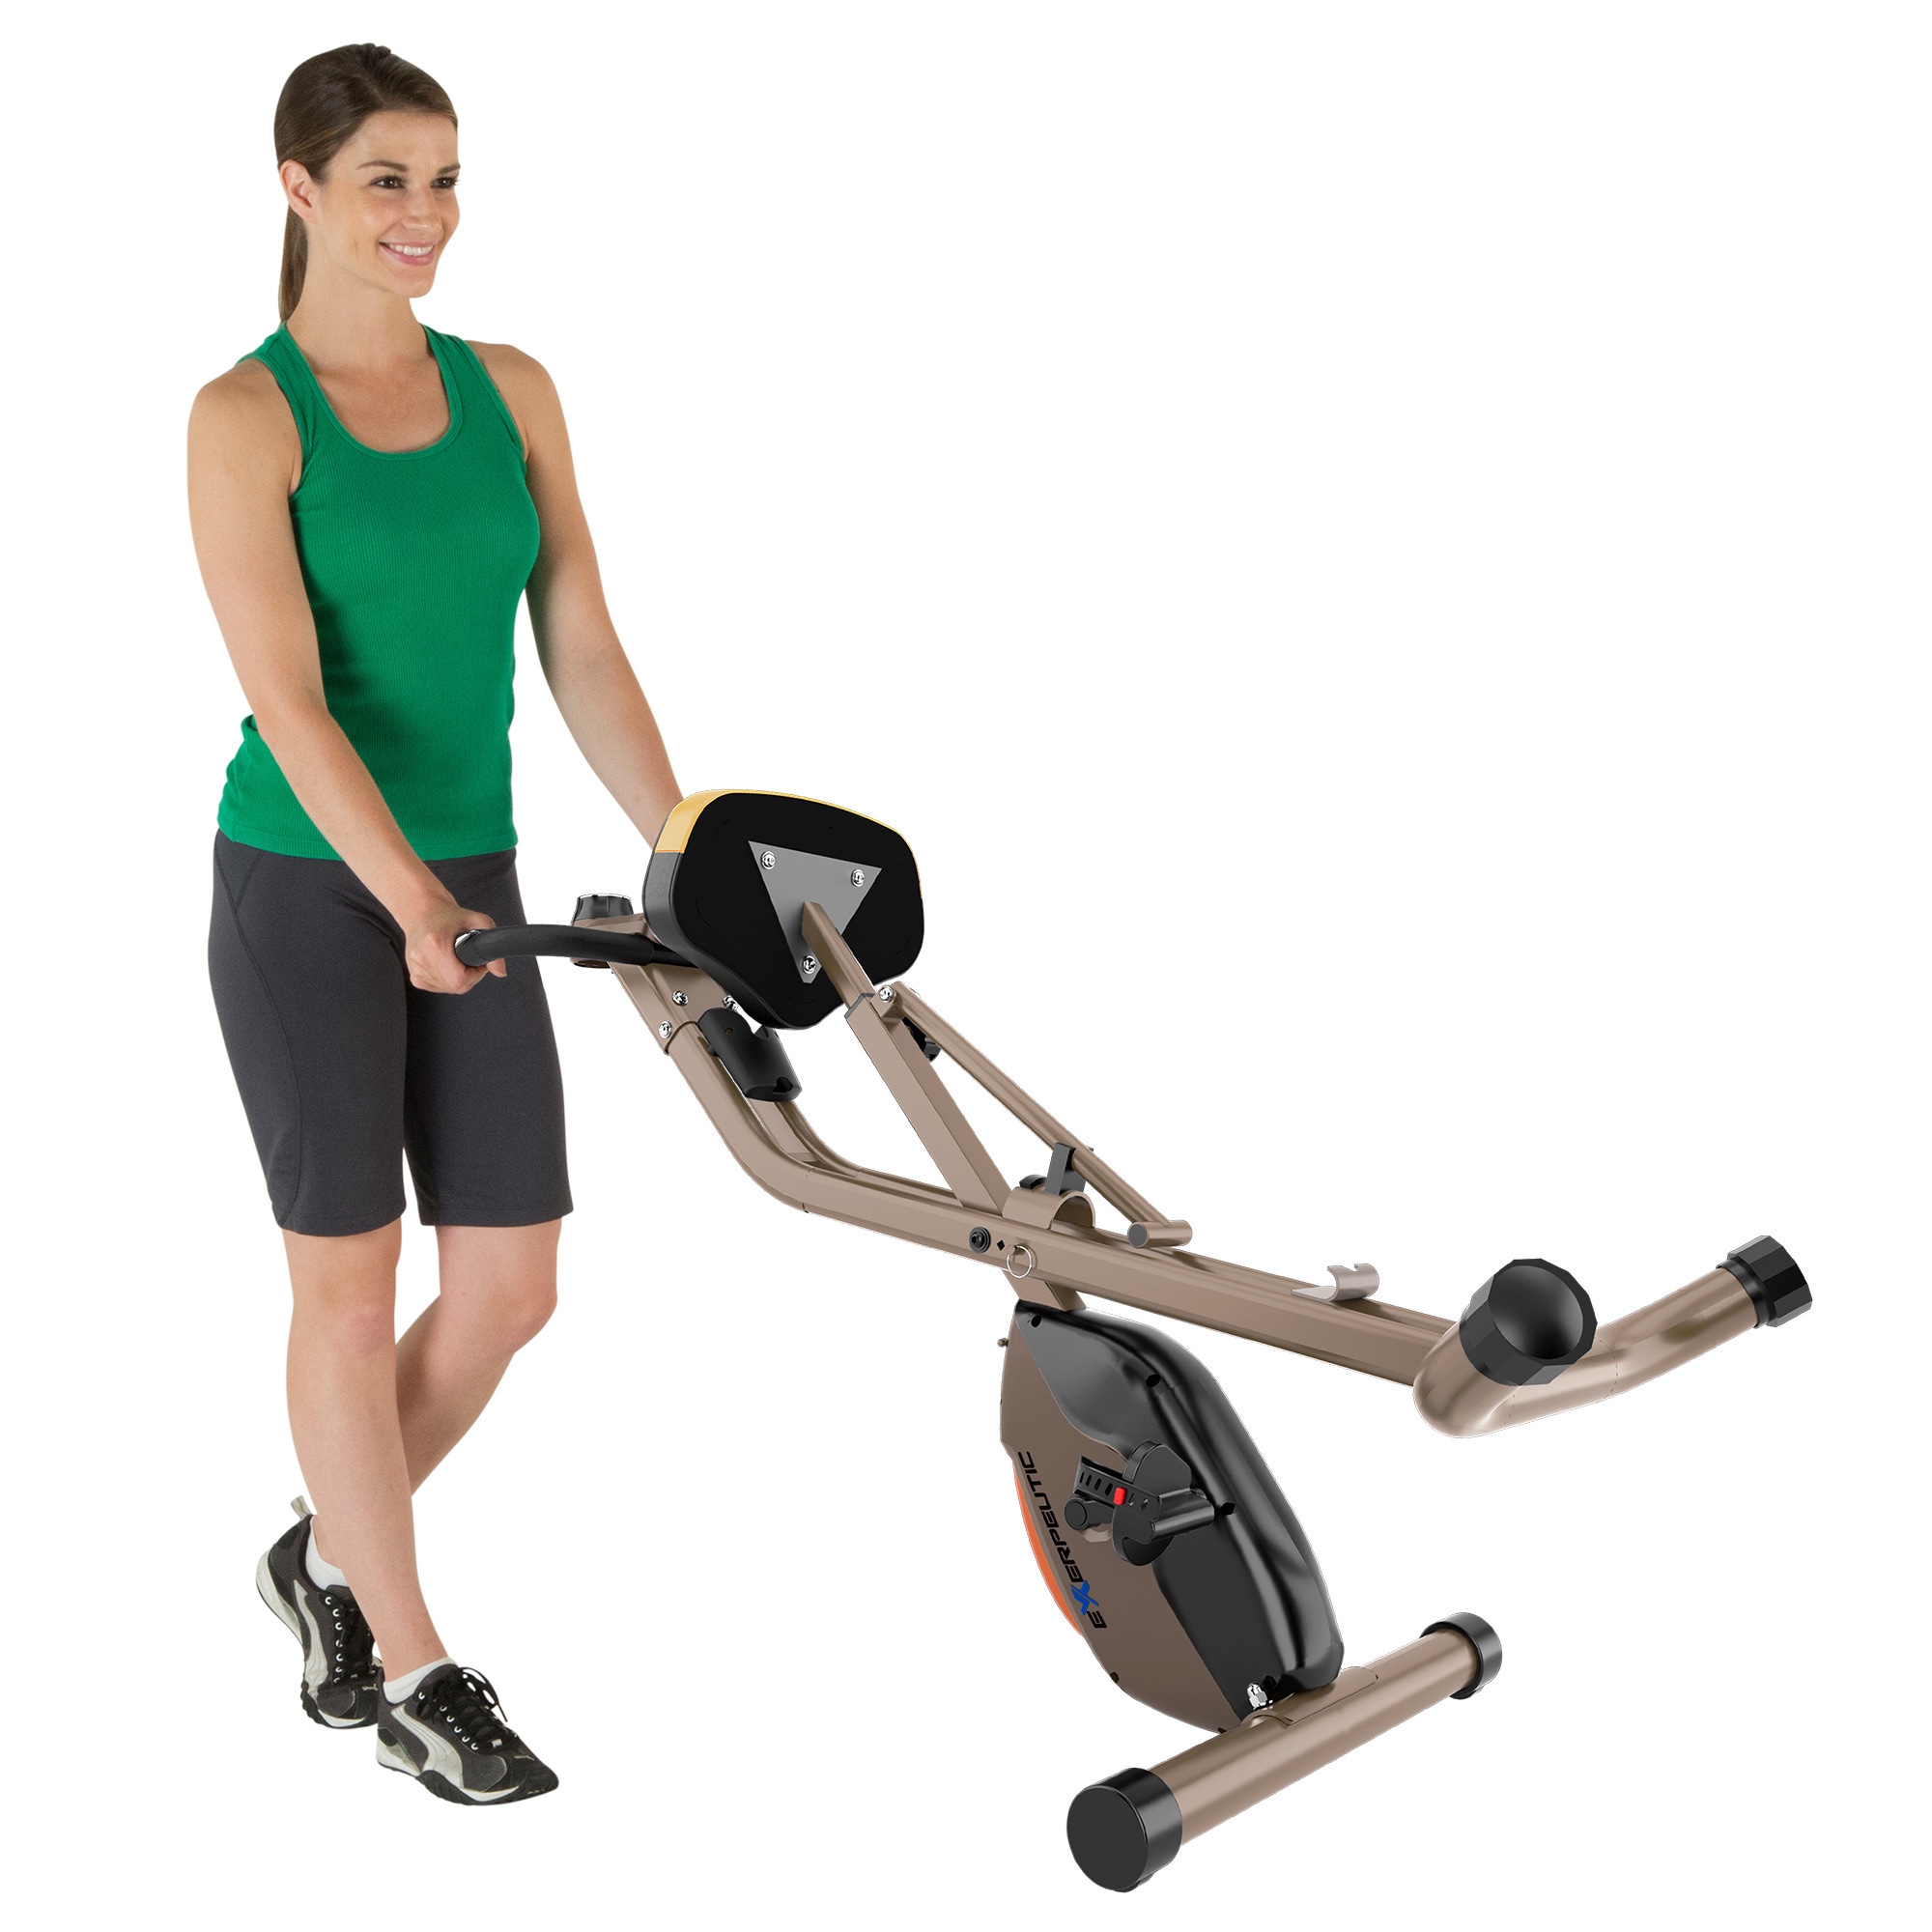 exerpeutic gold heavy duty foldable exercise bike